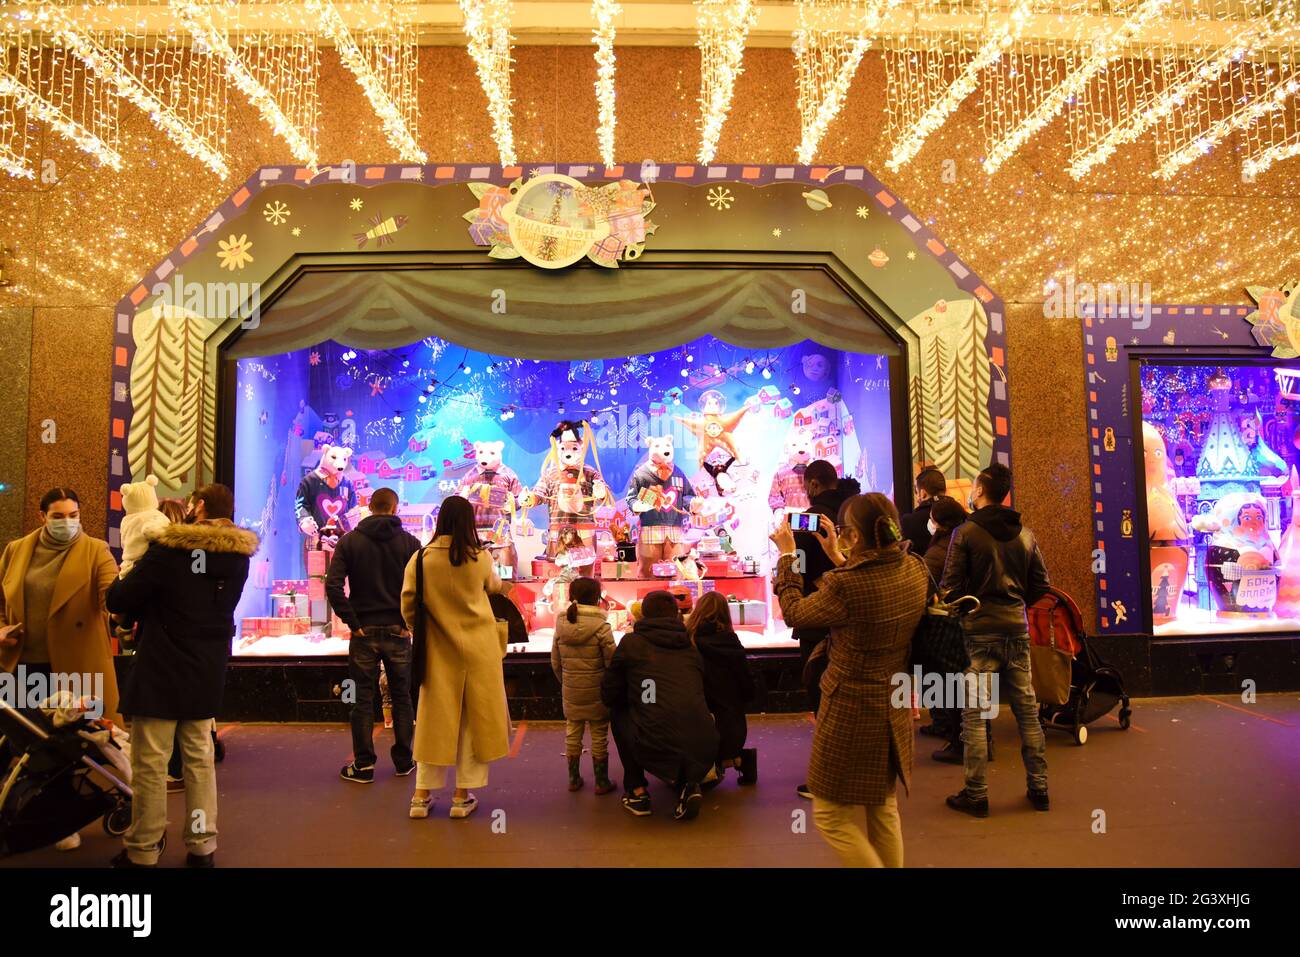 Paris (France): Christmas decorations in the Galeries Lafayette department store on December 15, 2020. People looking at the decorated shop windows Stock Photo